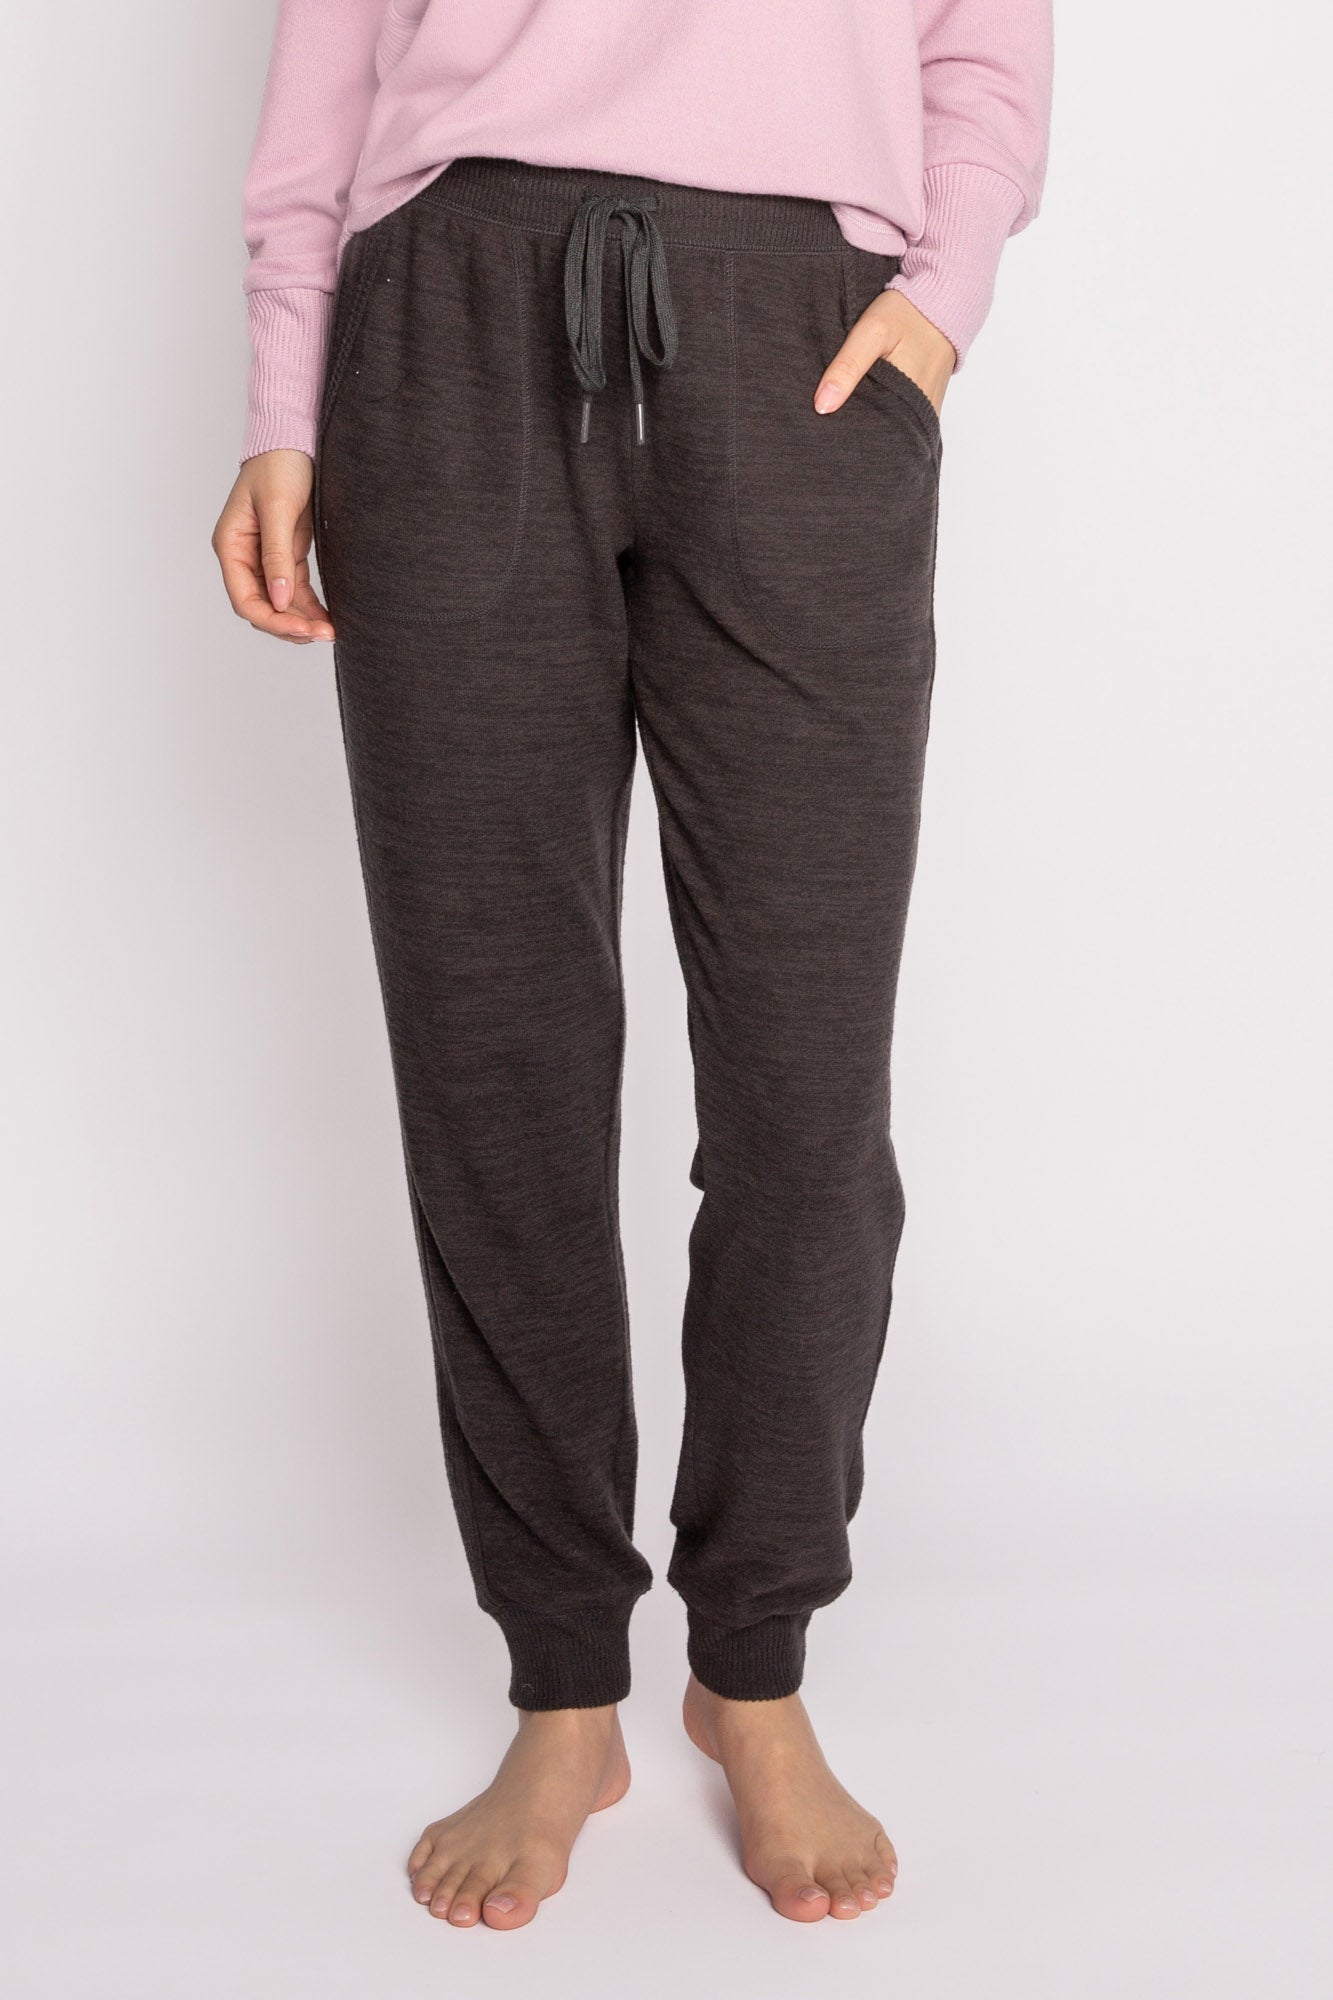 Sale Banded Bottom Peachy Jogger